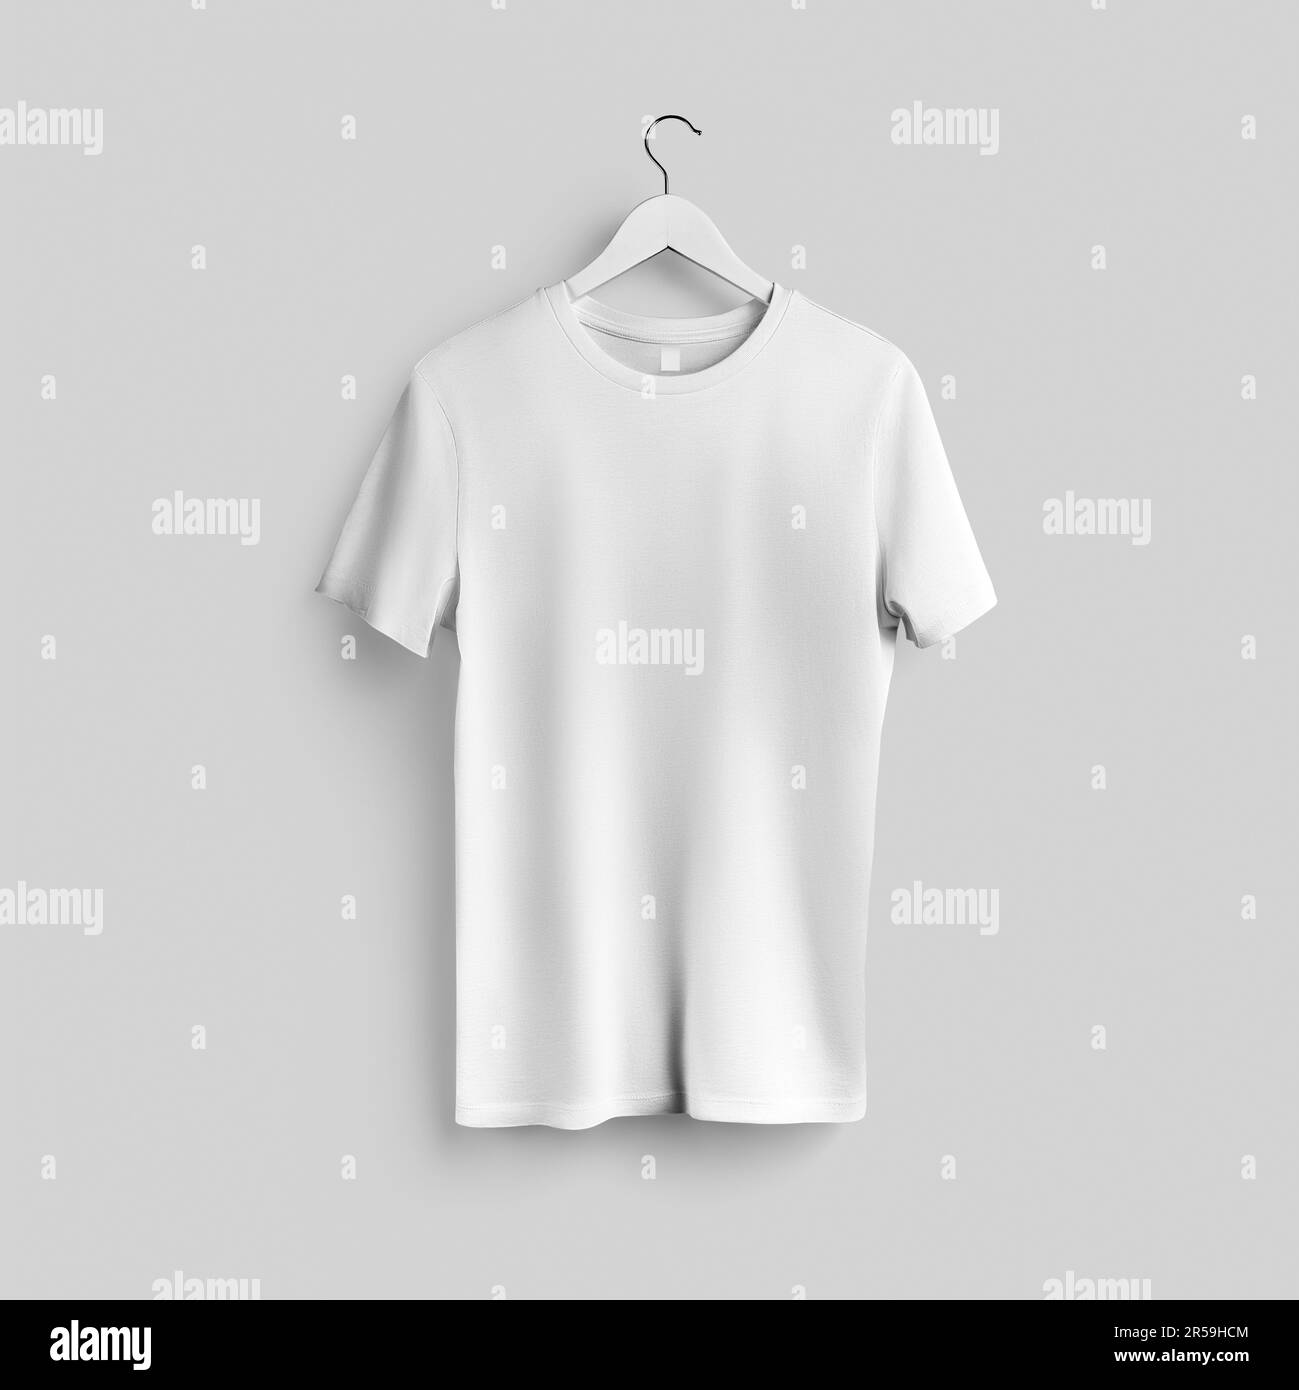 Fashion white t-shirt mockup on a hanger, texture clothing with label, round neck, isolated on background, front view. Unisex shirt template for desig Stock Photo